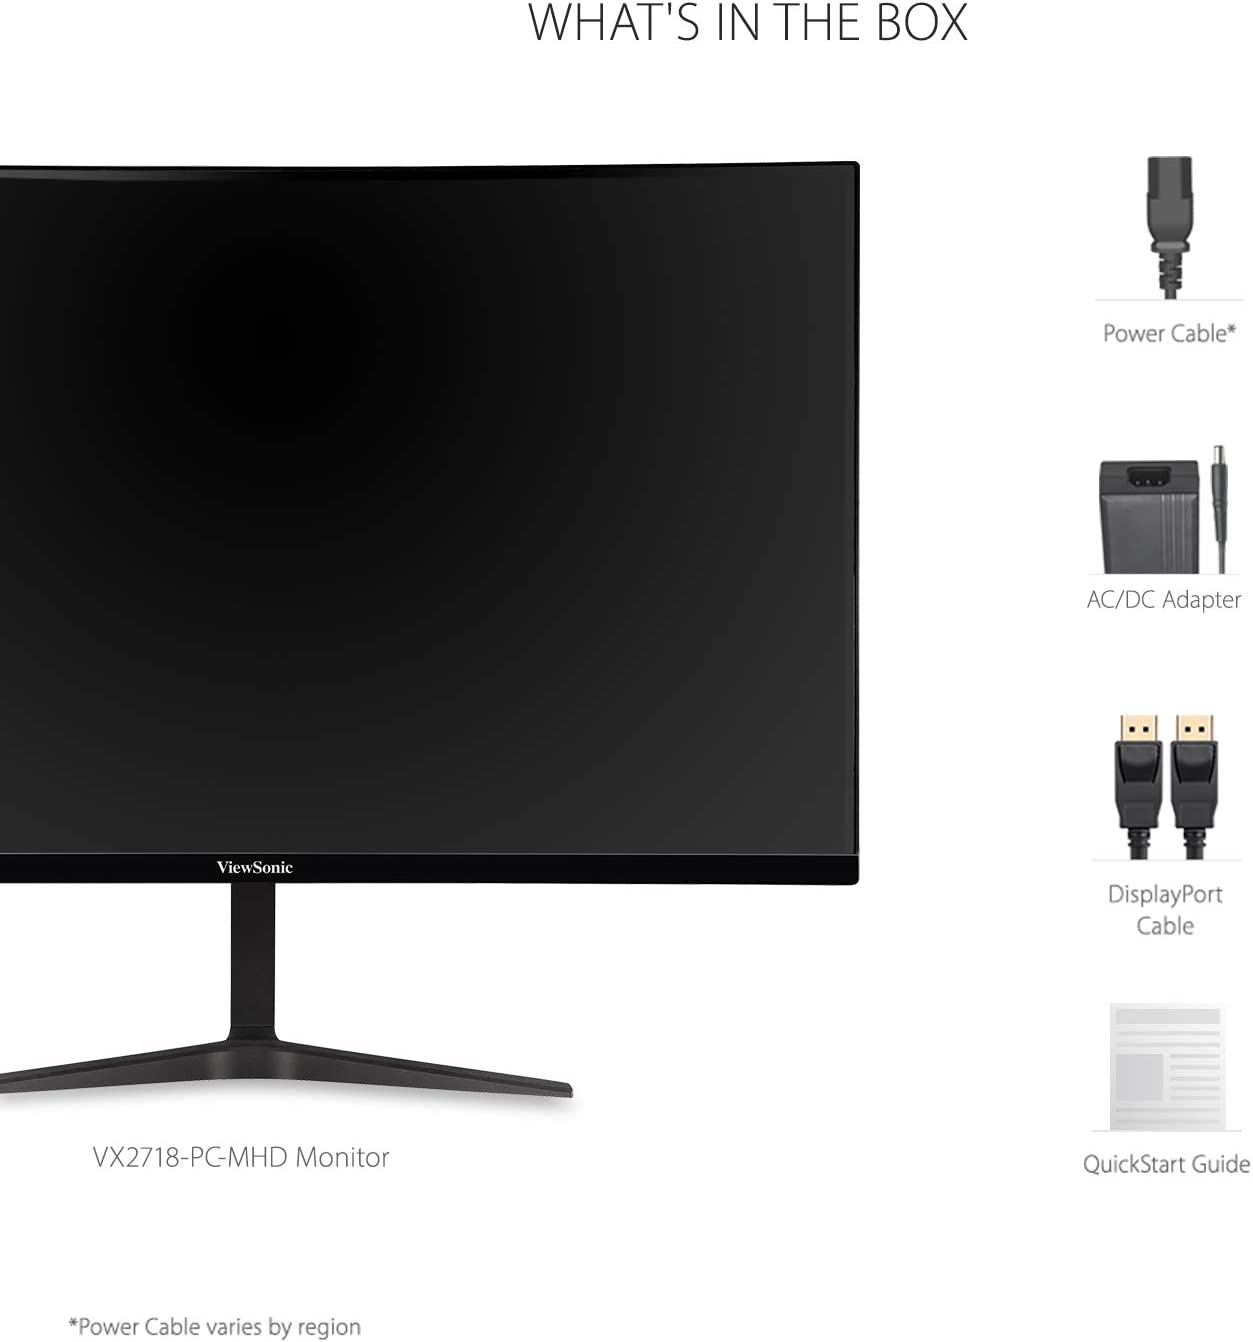 VIEWSONIC : 27IN CURVED GAMING MONITOR